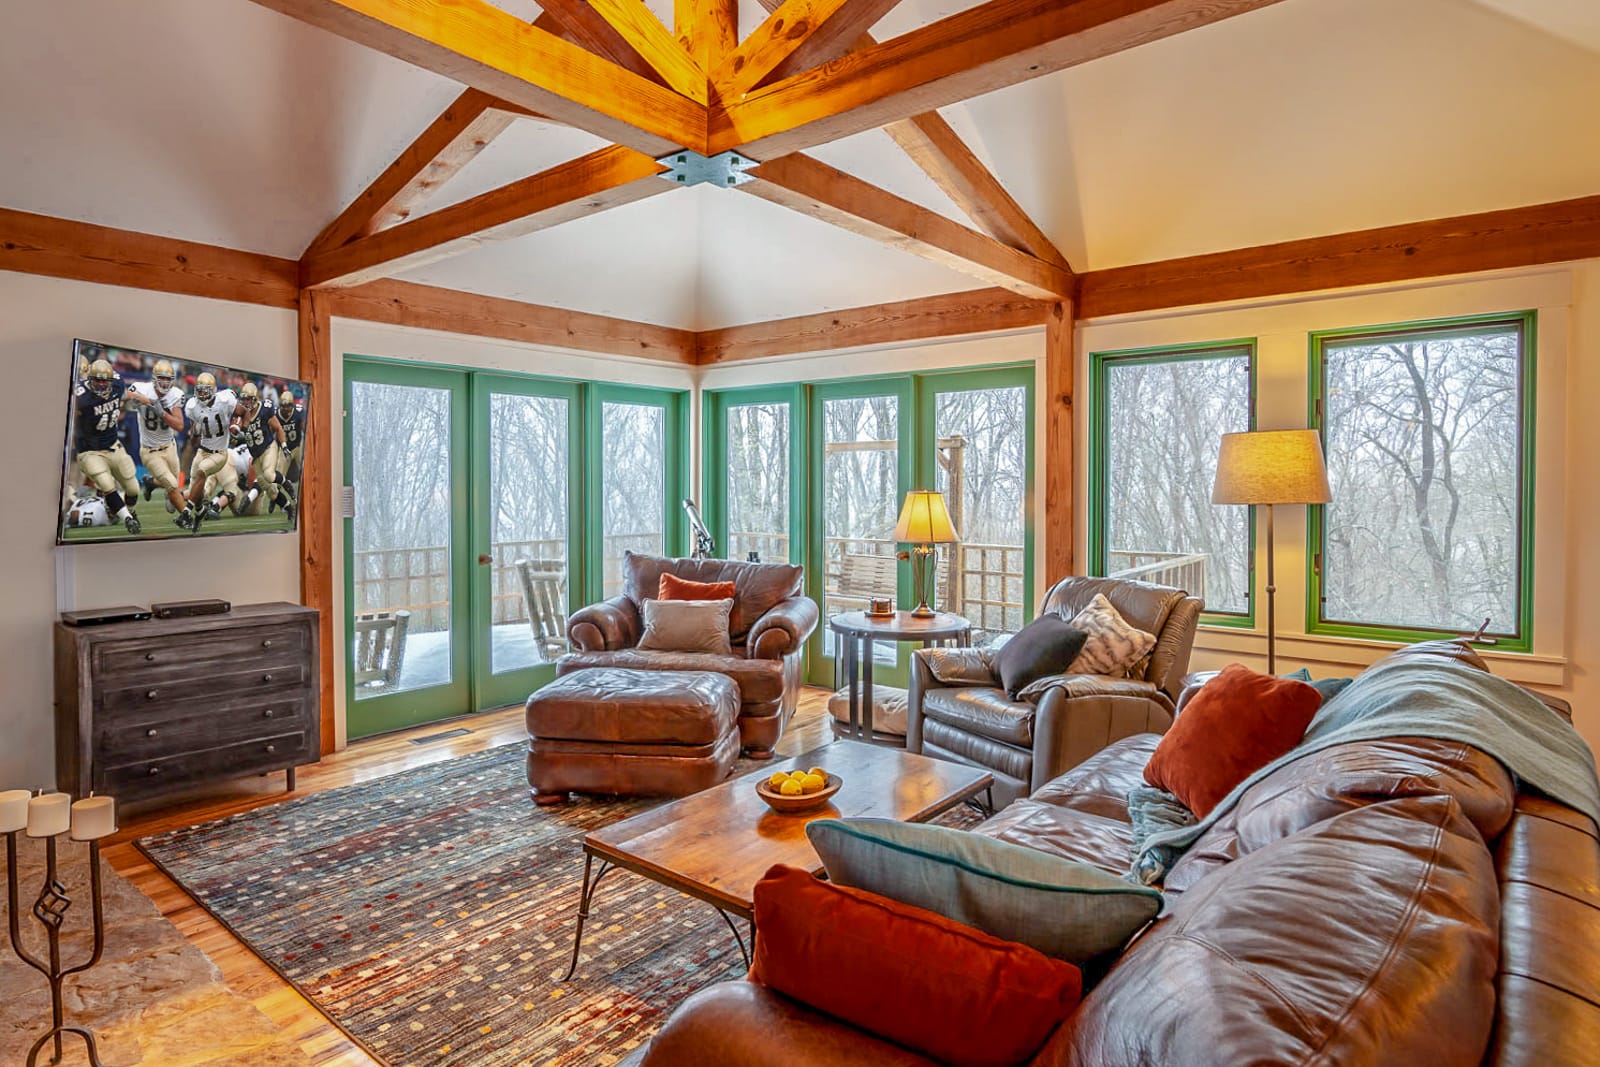 Welcome to Brigadoon! Enjoy views of the natural surroundings from the living area